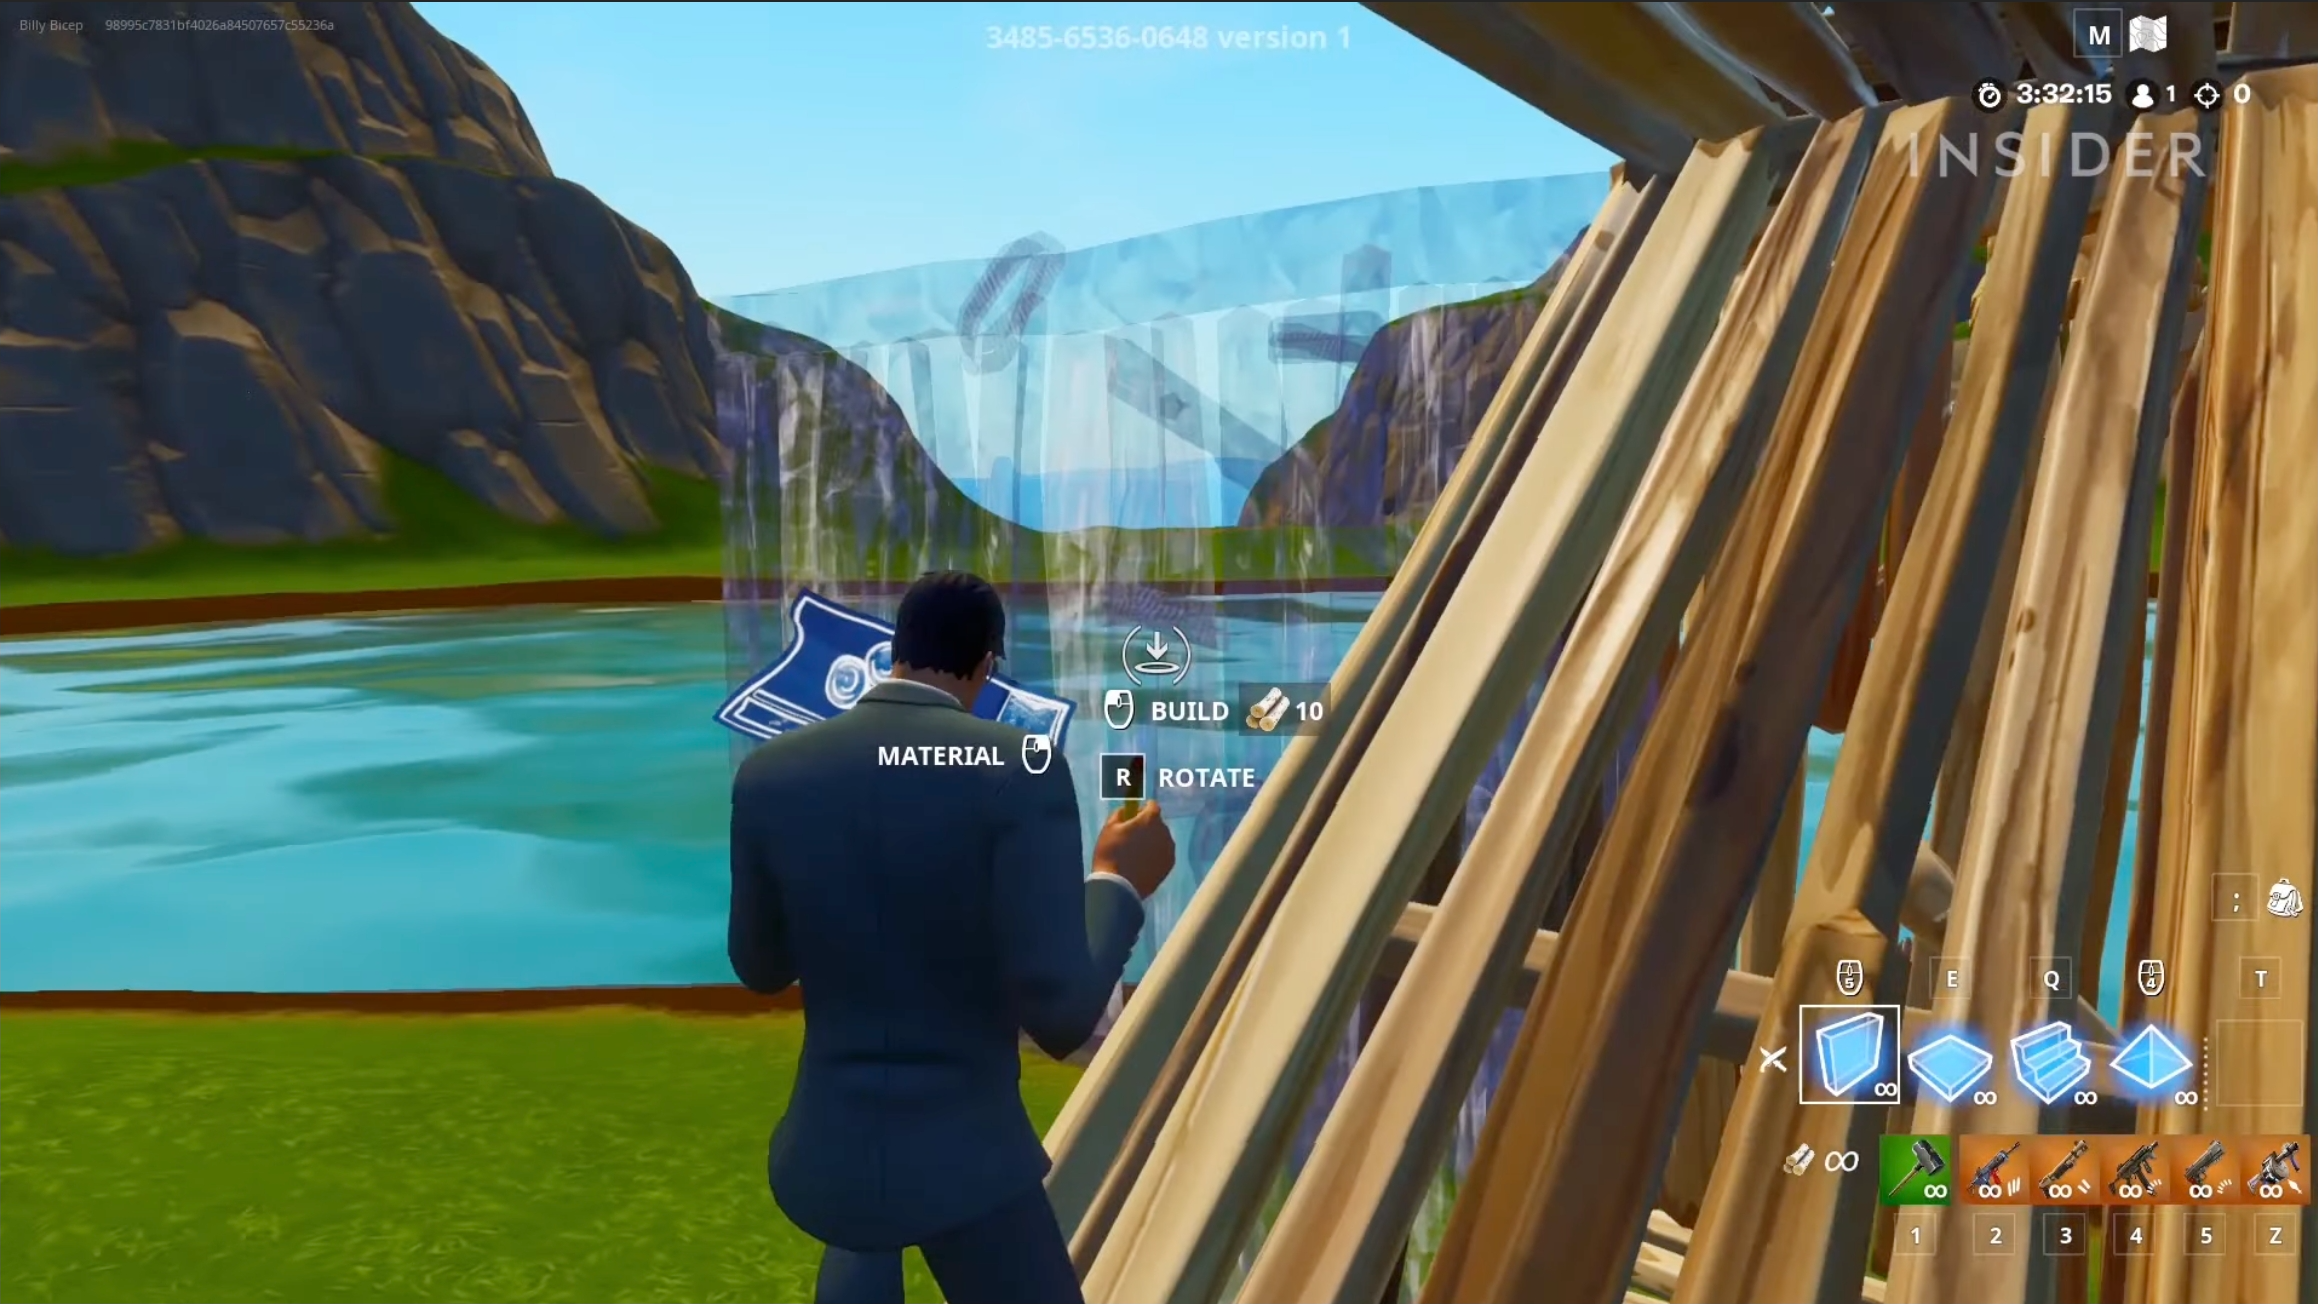 Fortnite’s building UI is a Masterclass in presenting relevant information accessibly.